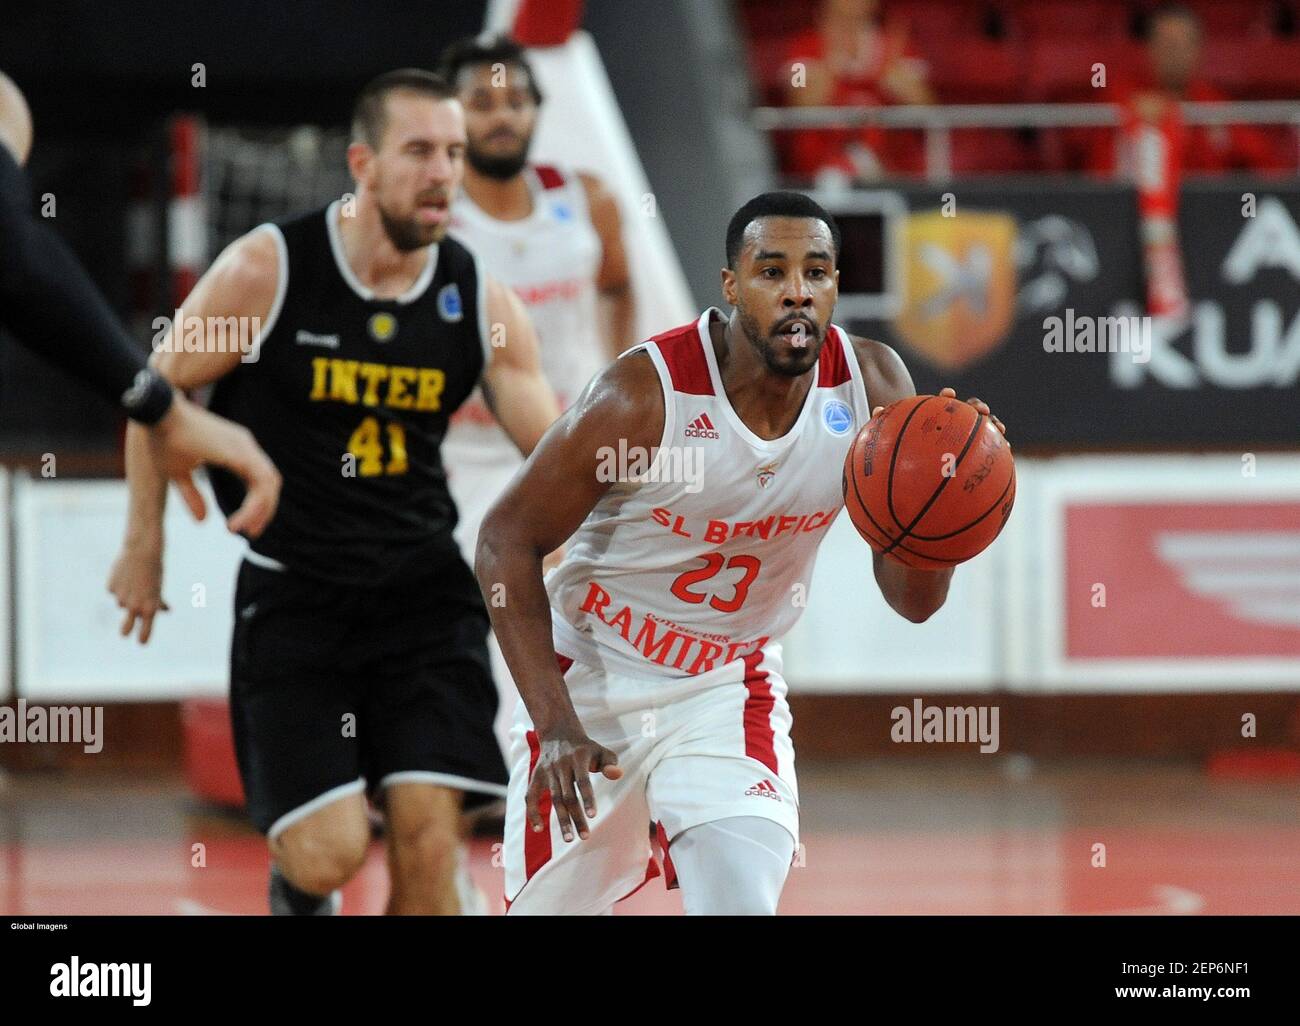 Lisbon, 06/11/2019 - SL Benfica hosted Inter Bratislava tonight at the  Pavilion of Light, in a match for Group A, Match 3, of FIBA Europe CUP  2019/20 Basketball. Toure Murry (Ã lvaro